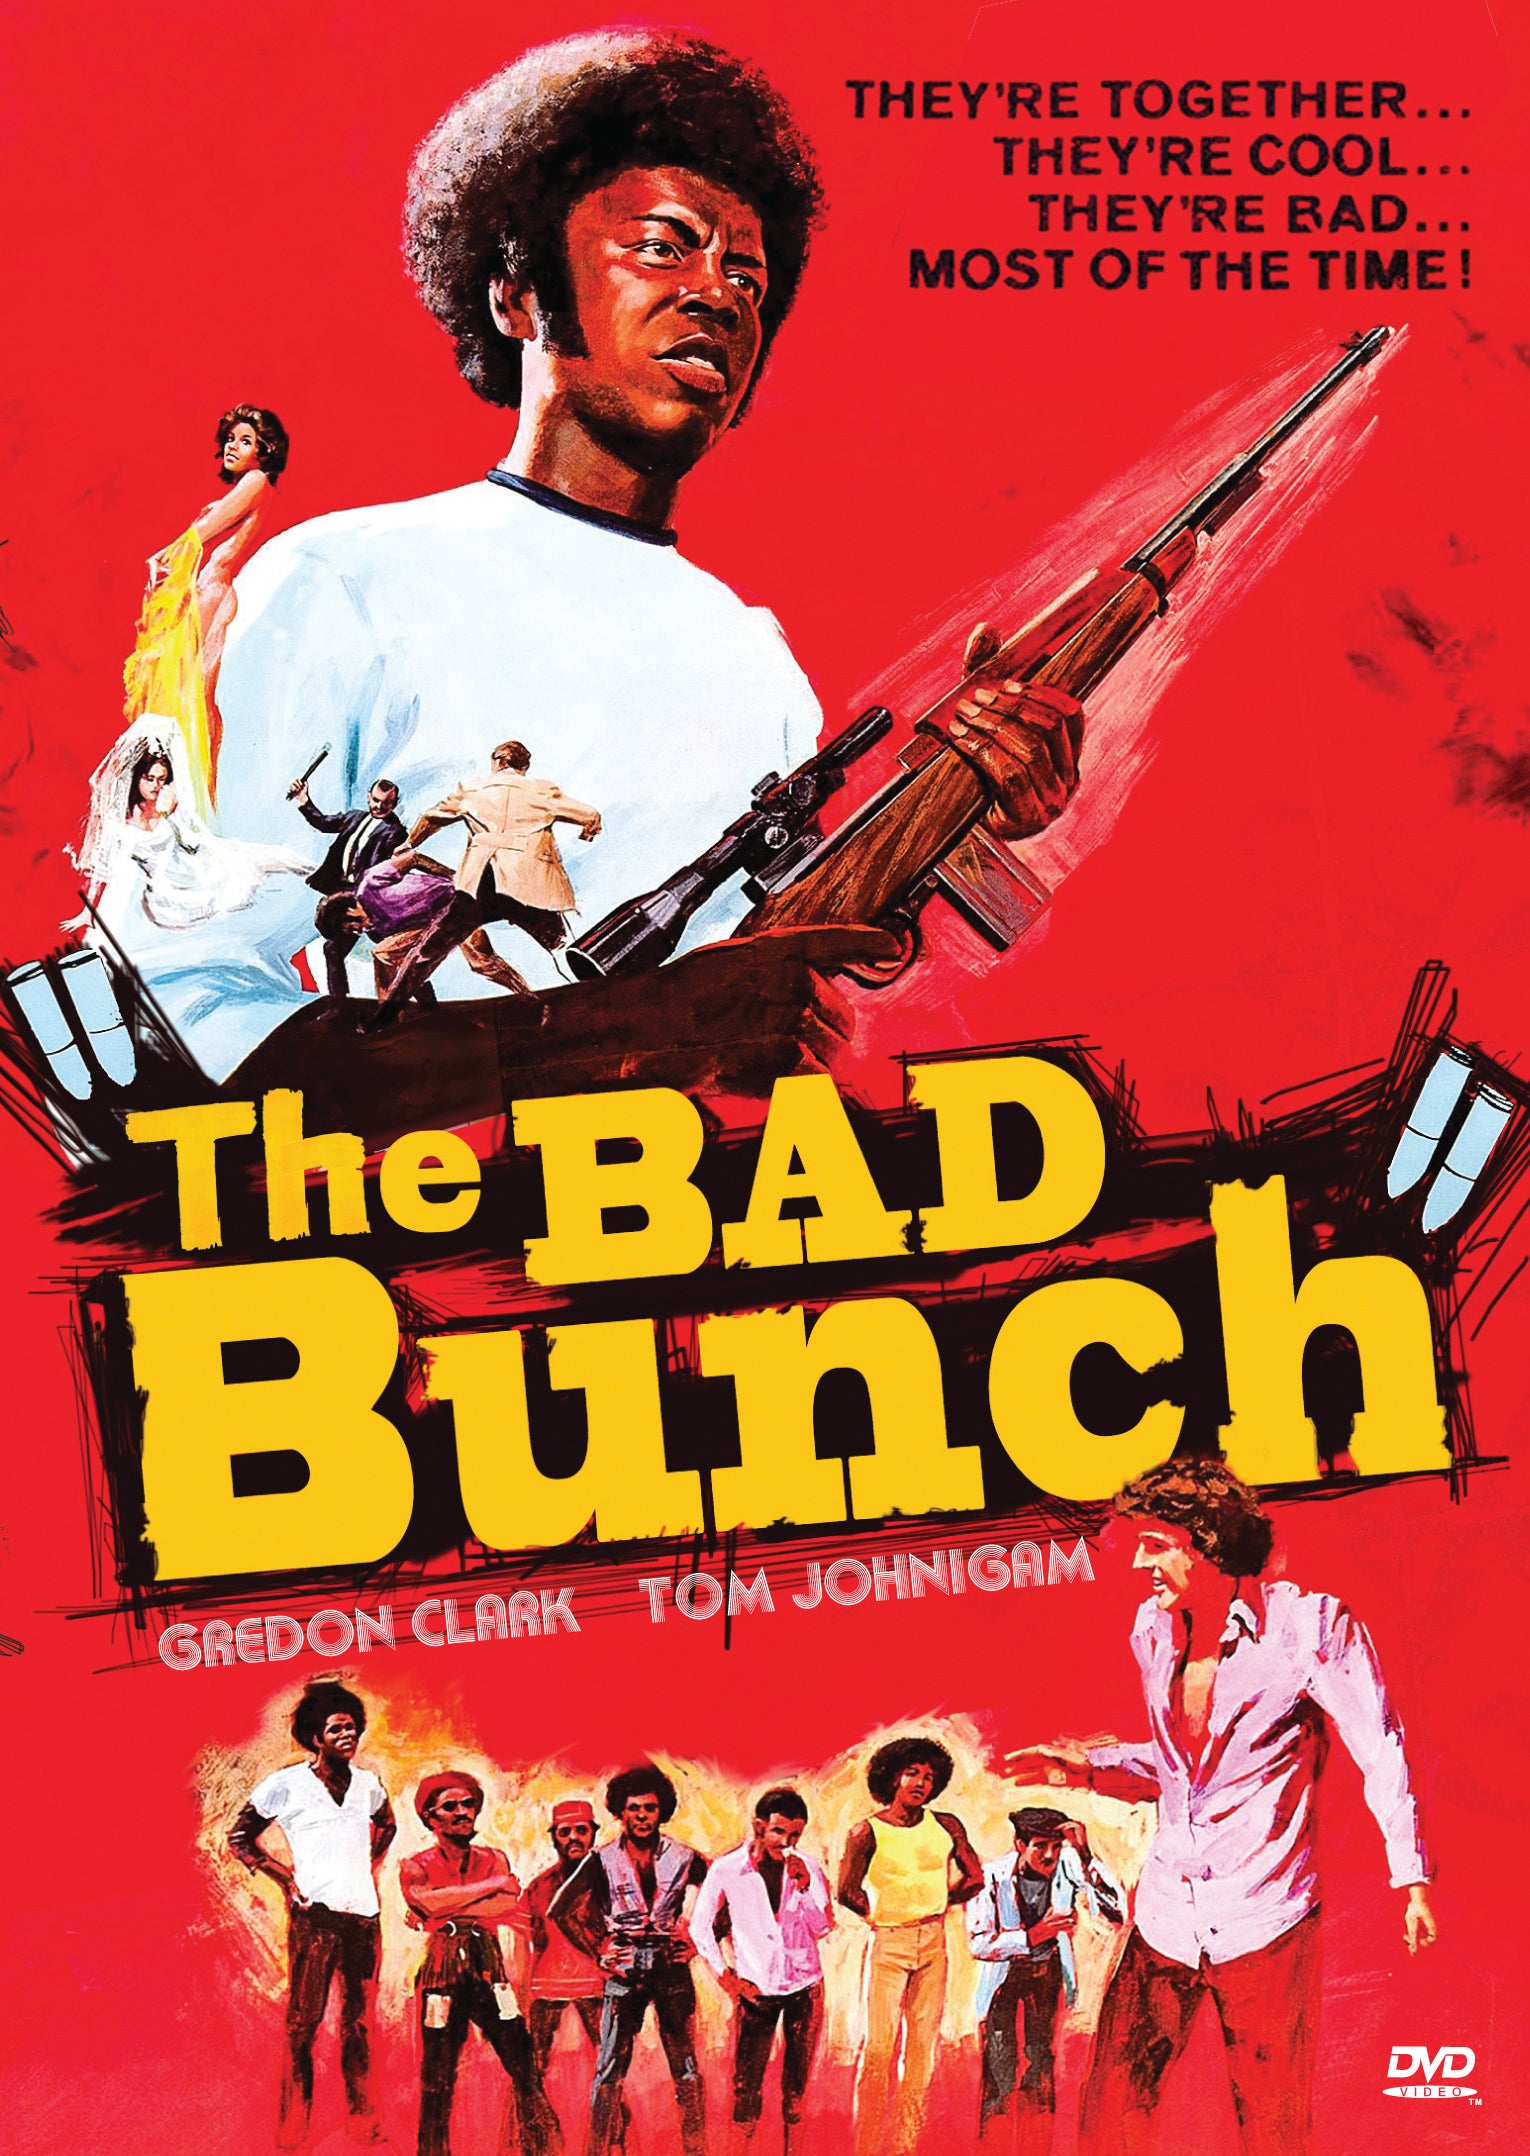 THE BAD BUNCH DVD